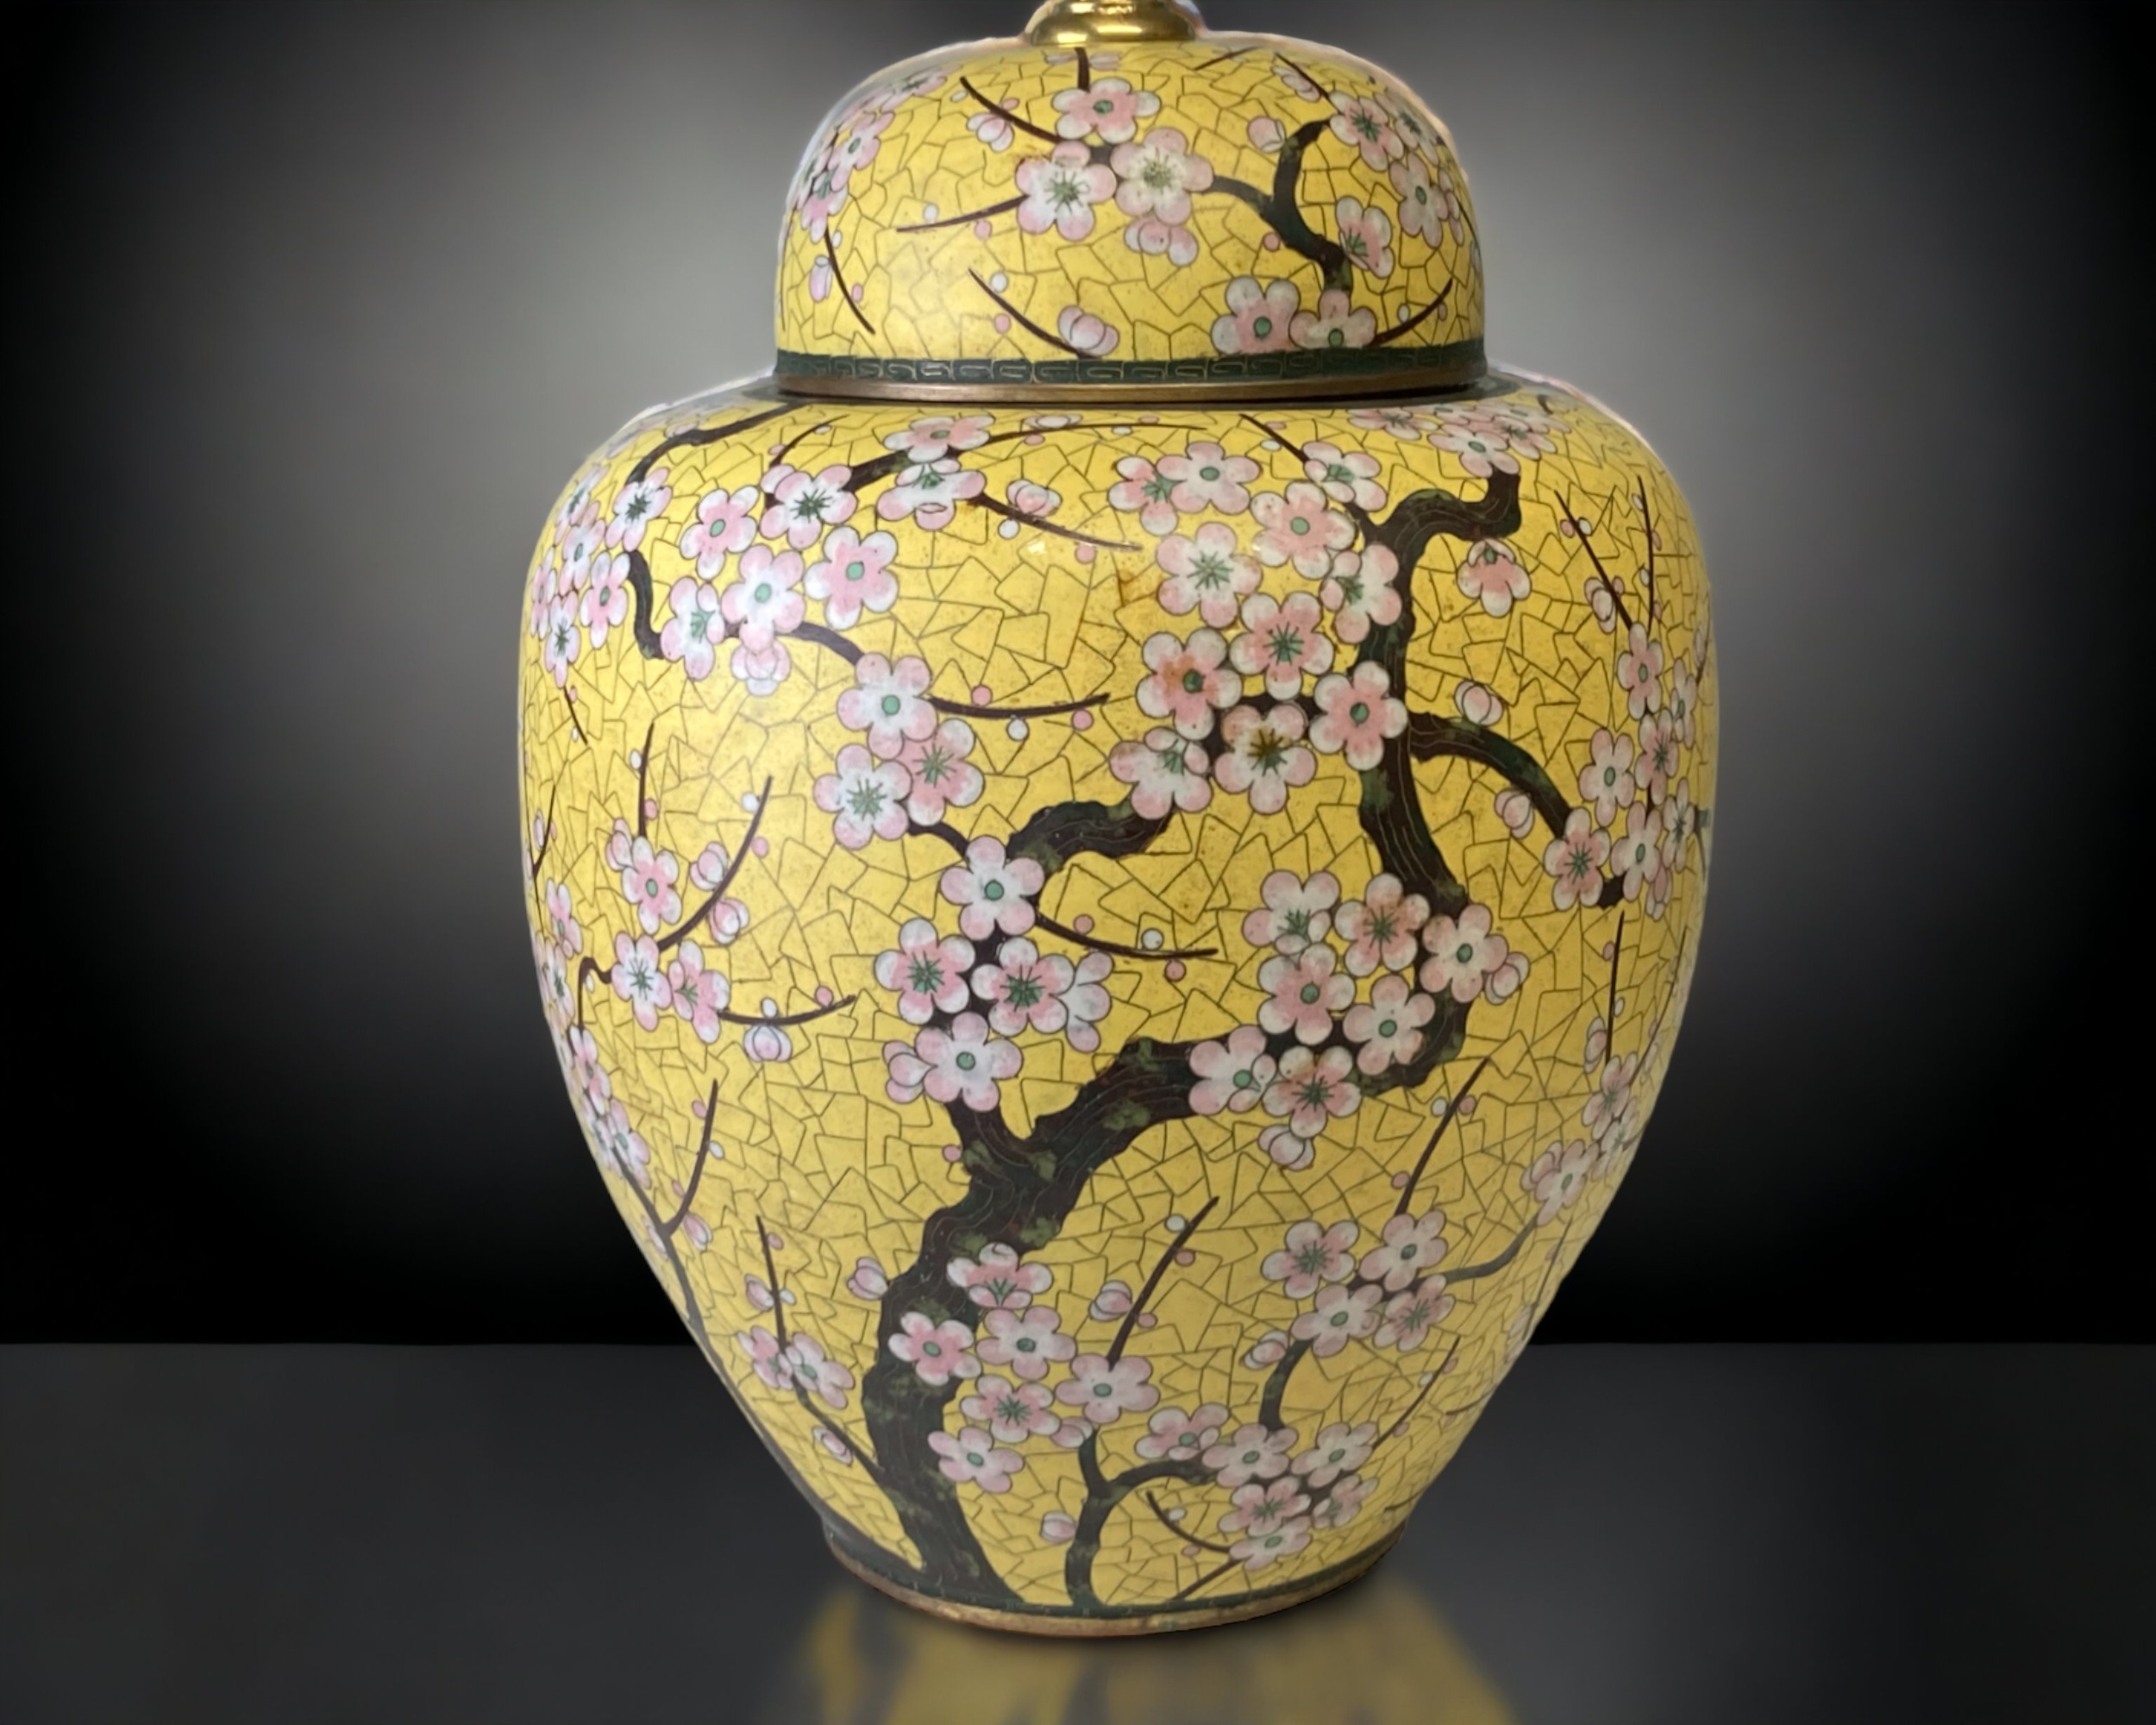 A LARGE CHINESE CLOISONNE JAR & COVER, CONVERTED TO TABLE LAMP. LATE QING DYNASTY. IMPERIAL YELLOW - Image 3 of 7